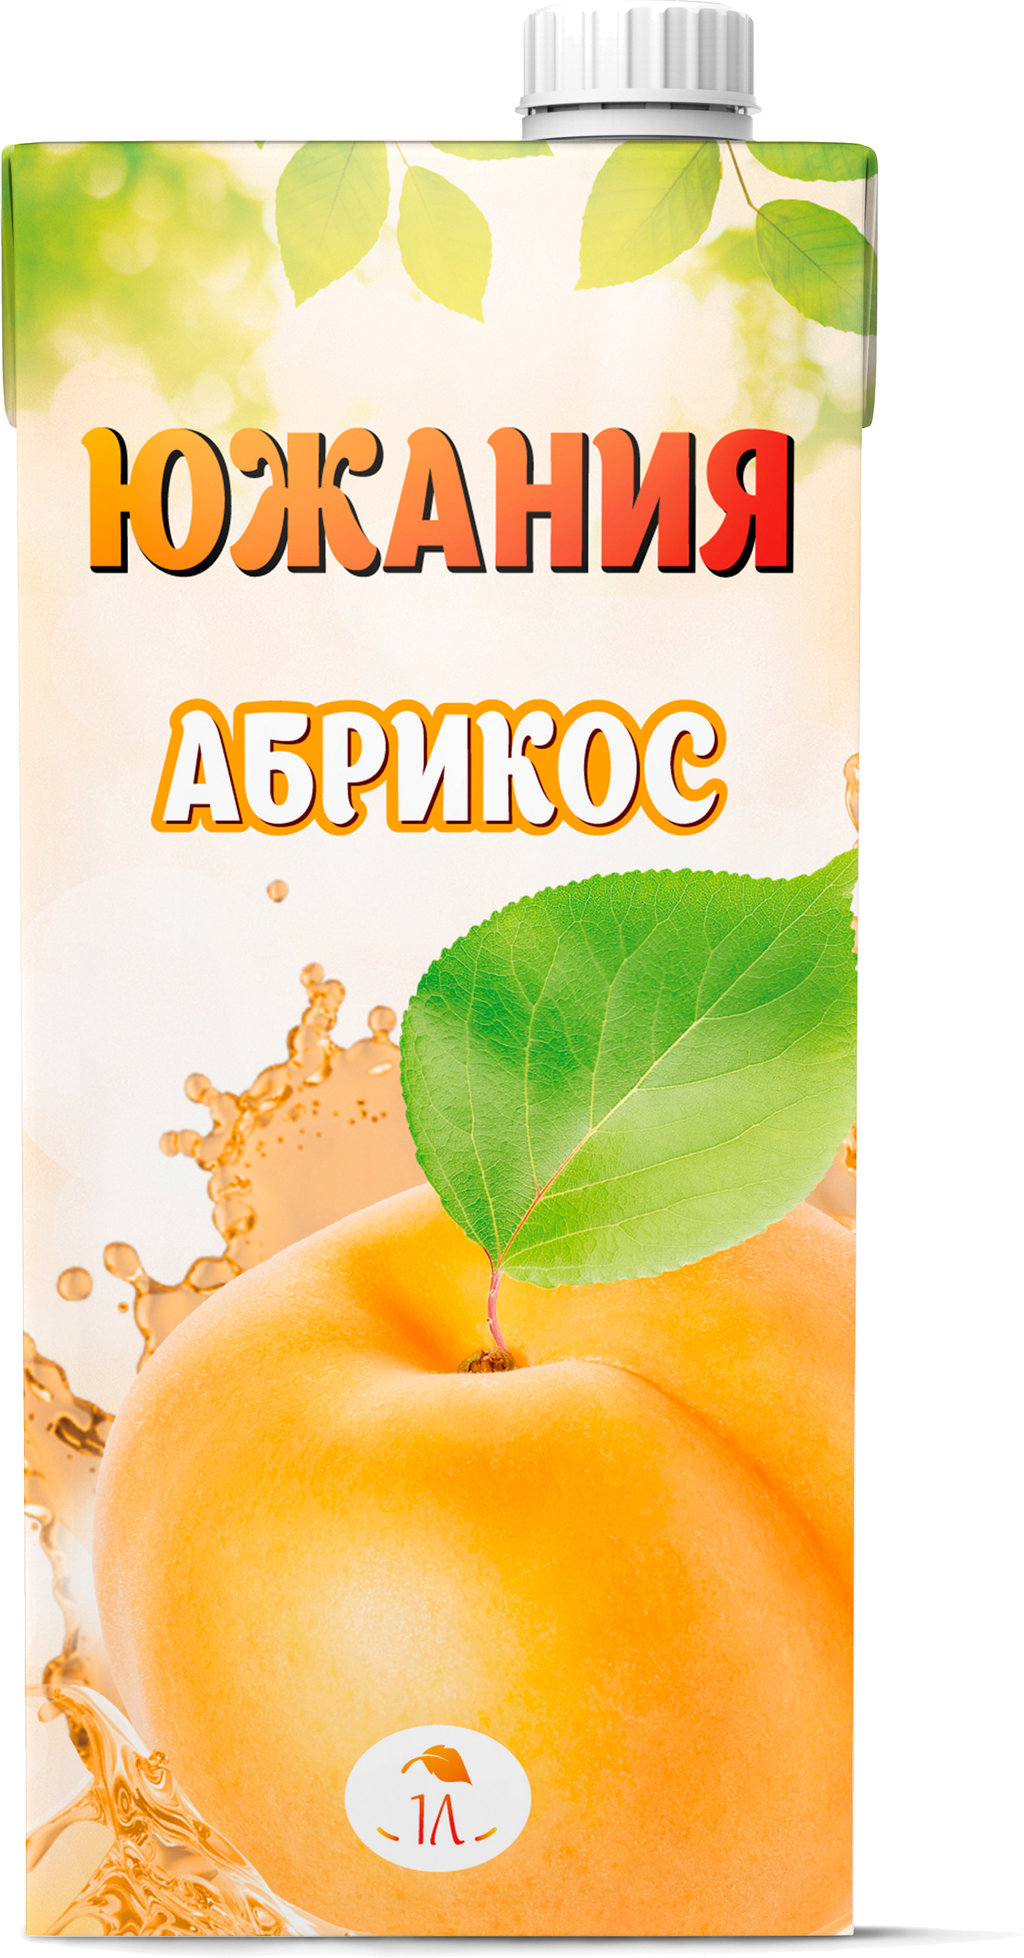 Apricot Juice Beverage with pulp